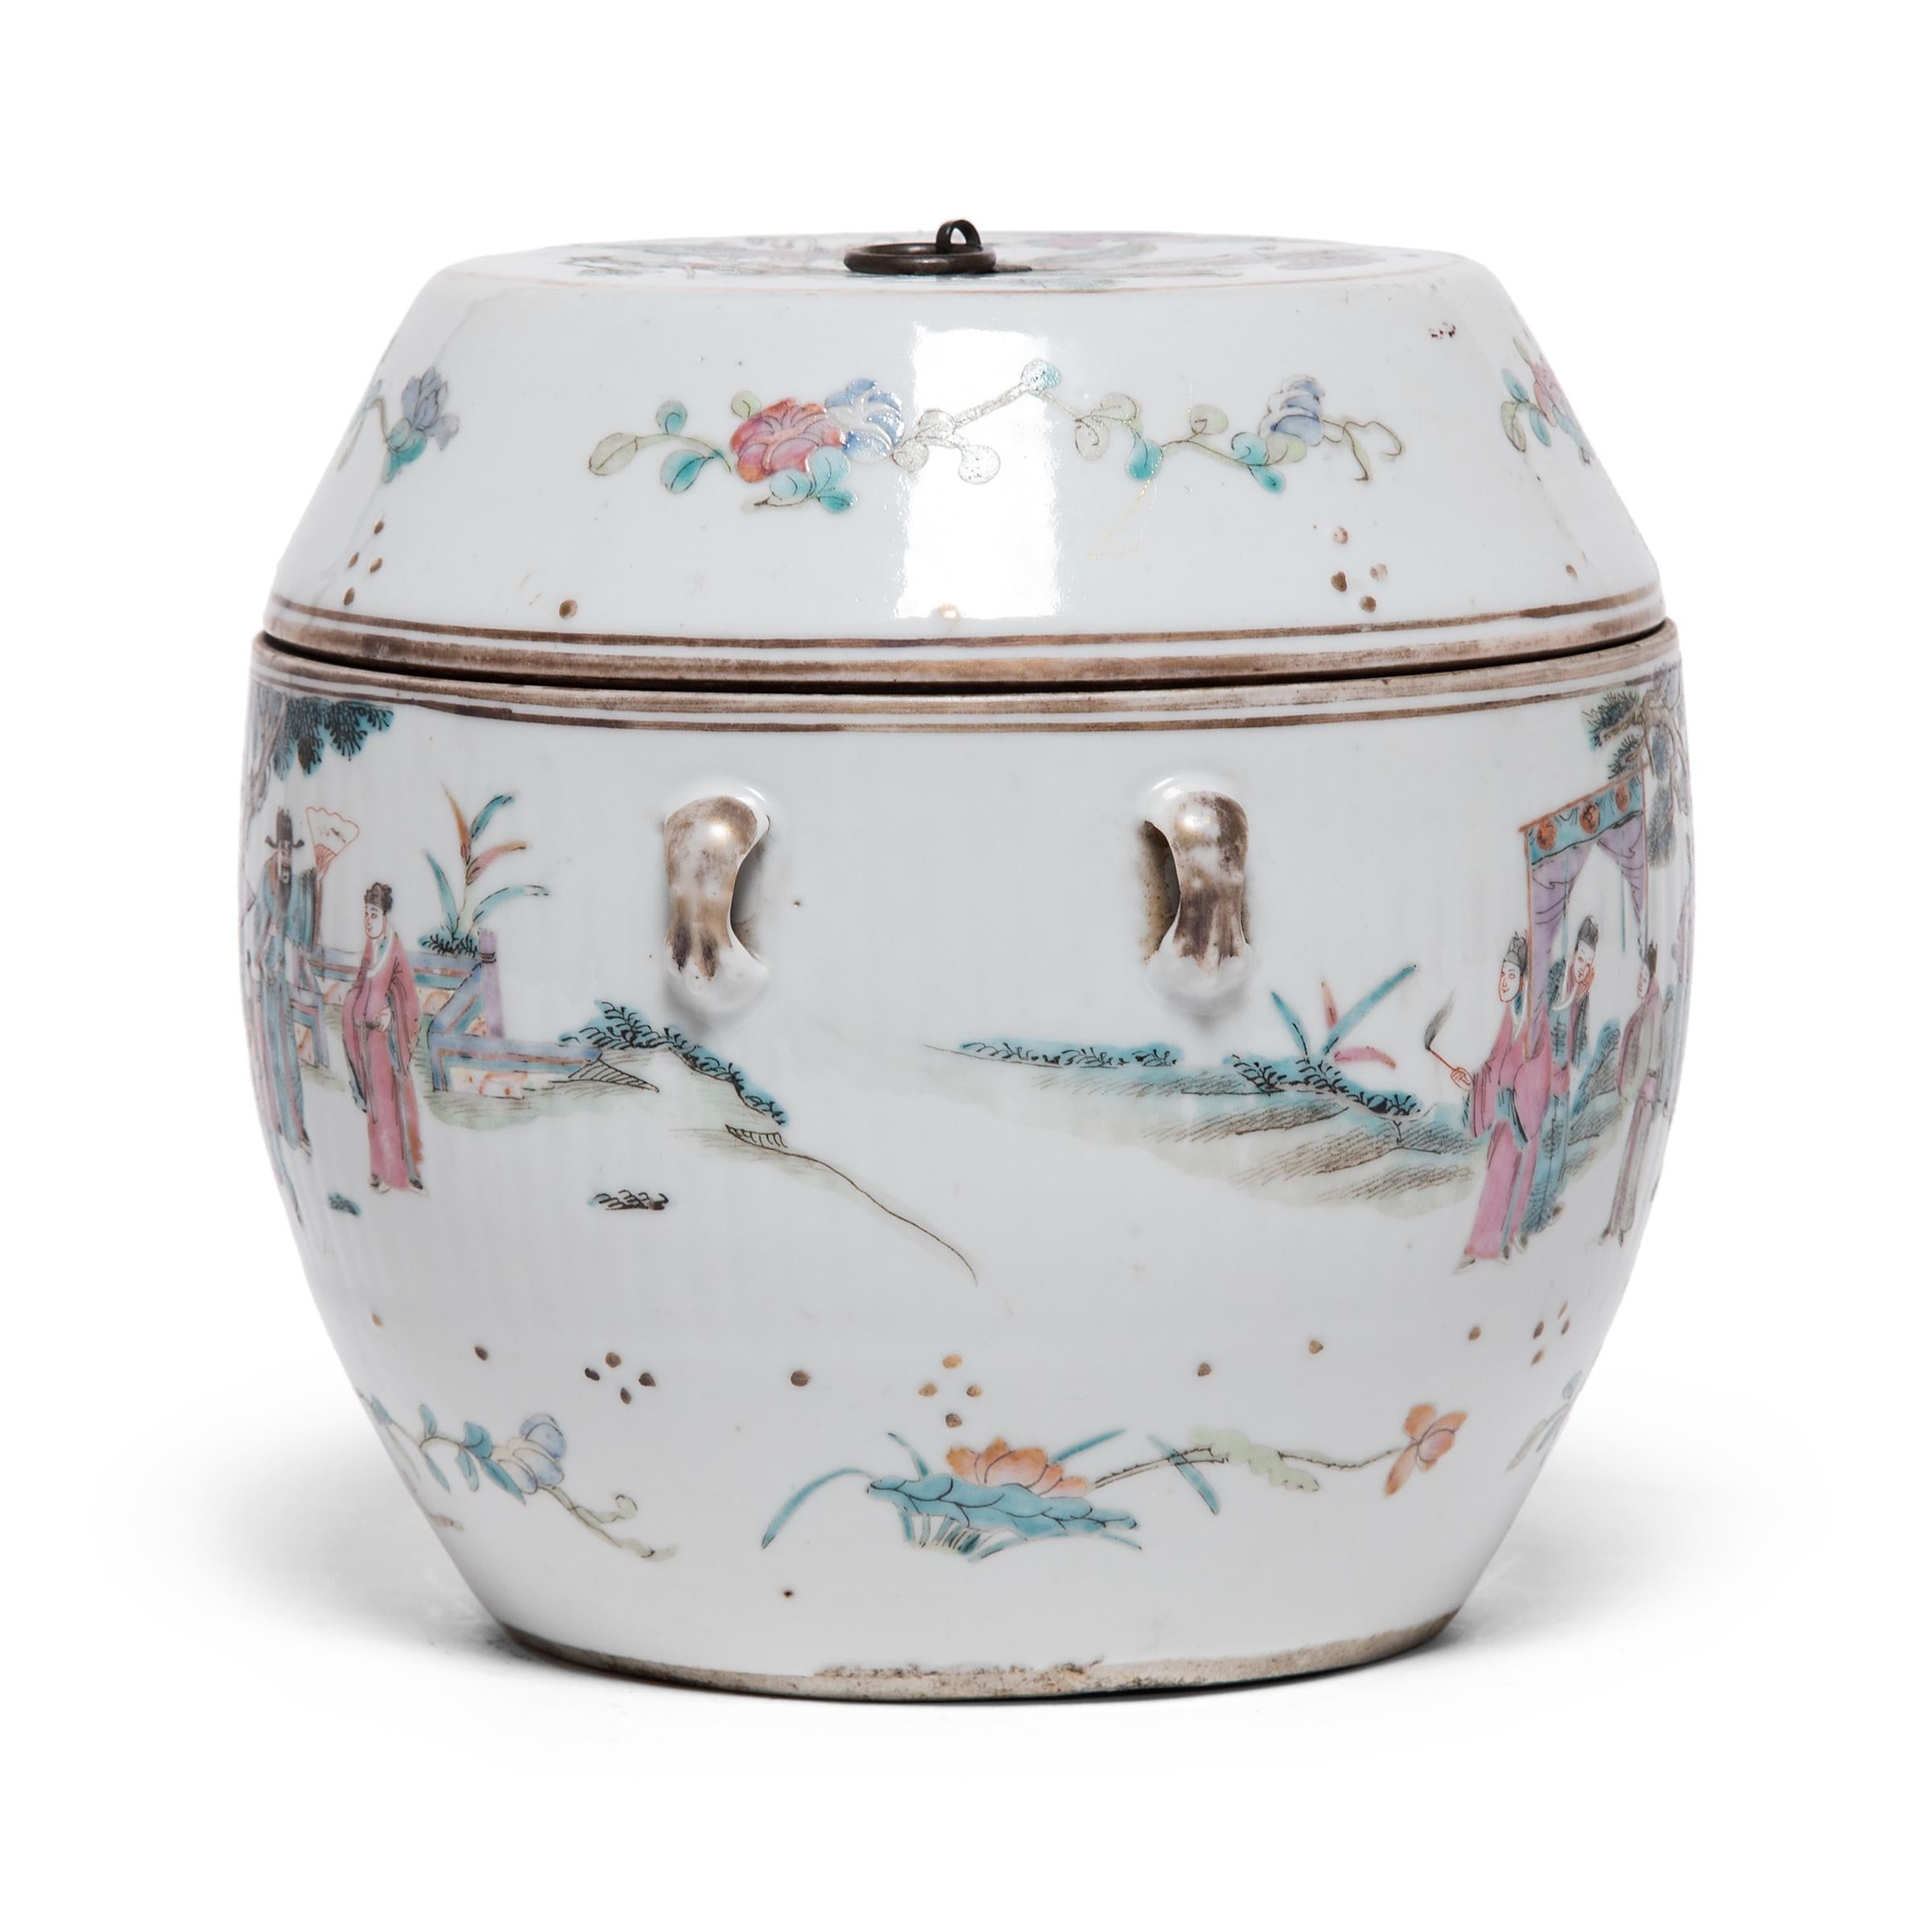 This late 19th century covered jar takes its rounded shape from serving tureens used to serve soups and stews. Contrasted by a crisp white field, the lid and sides are intricately decorated with scenes of a Ming-dynasty courtly gathering. Surrounded